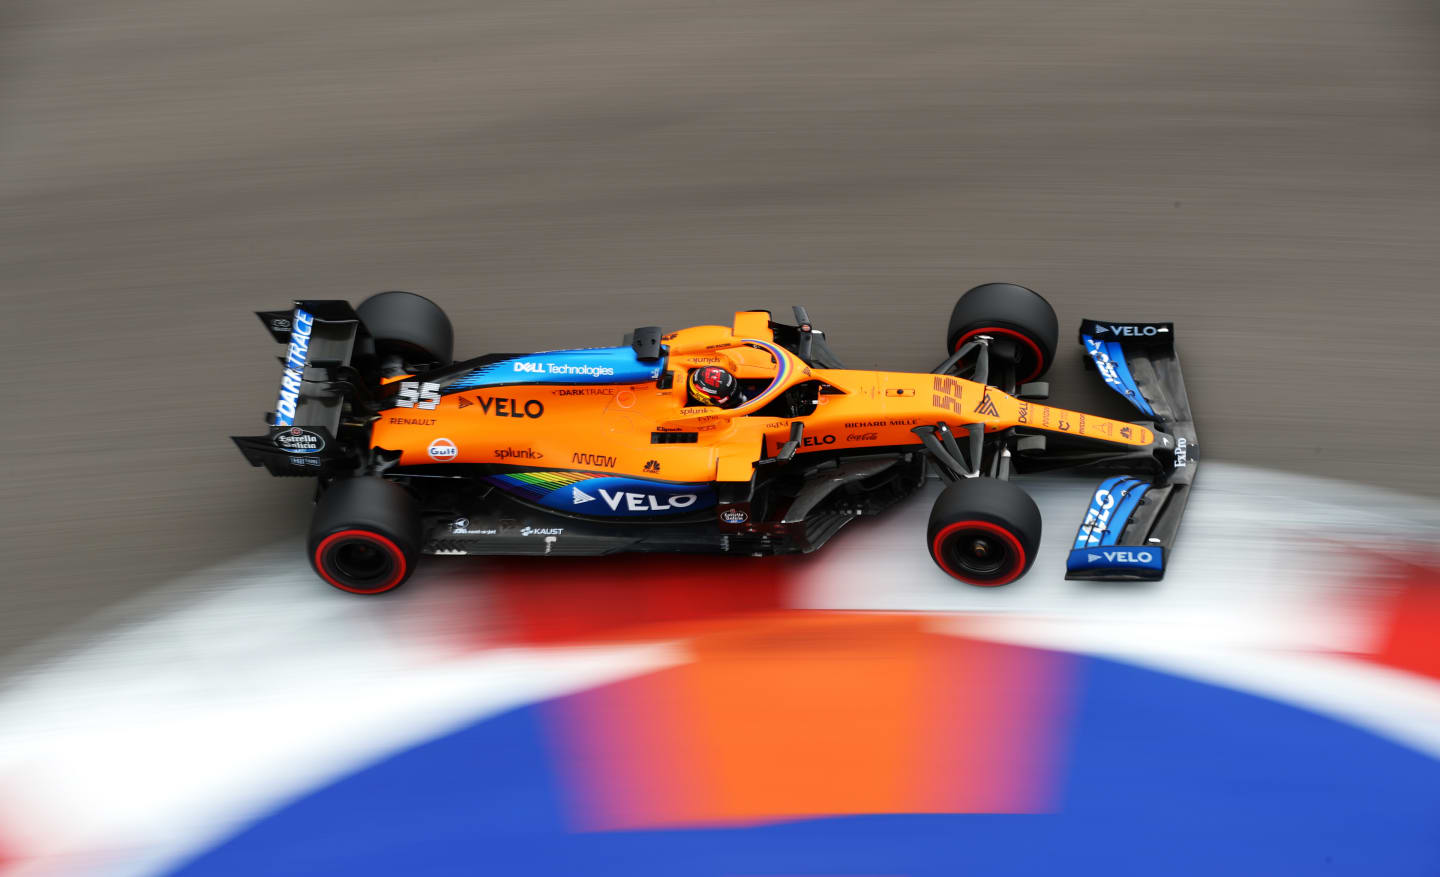 SOCHI, RUSSIA - SEPTEMBER 26: Carlos Sainz of Spain driving the (55) McLaren F1 Team MCL35 Renault on track during qualifying ahead of the F1 Grand Prix of Russia at Sochi Autodrom on September 26, 2020 in Sochi, Russia. (Photo by Bryn Lennon/Getty Images)